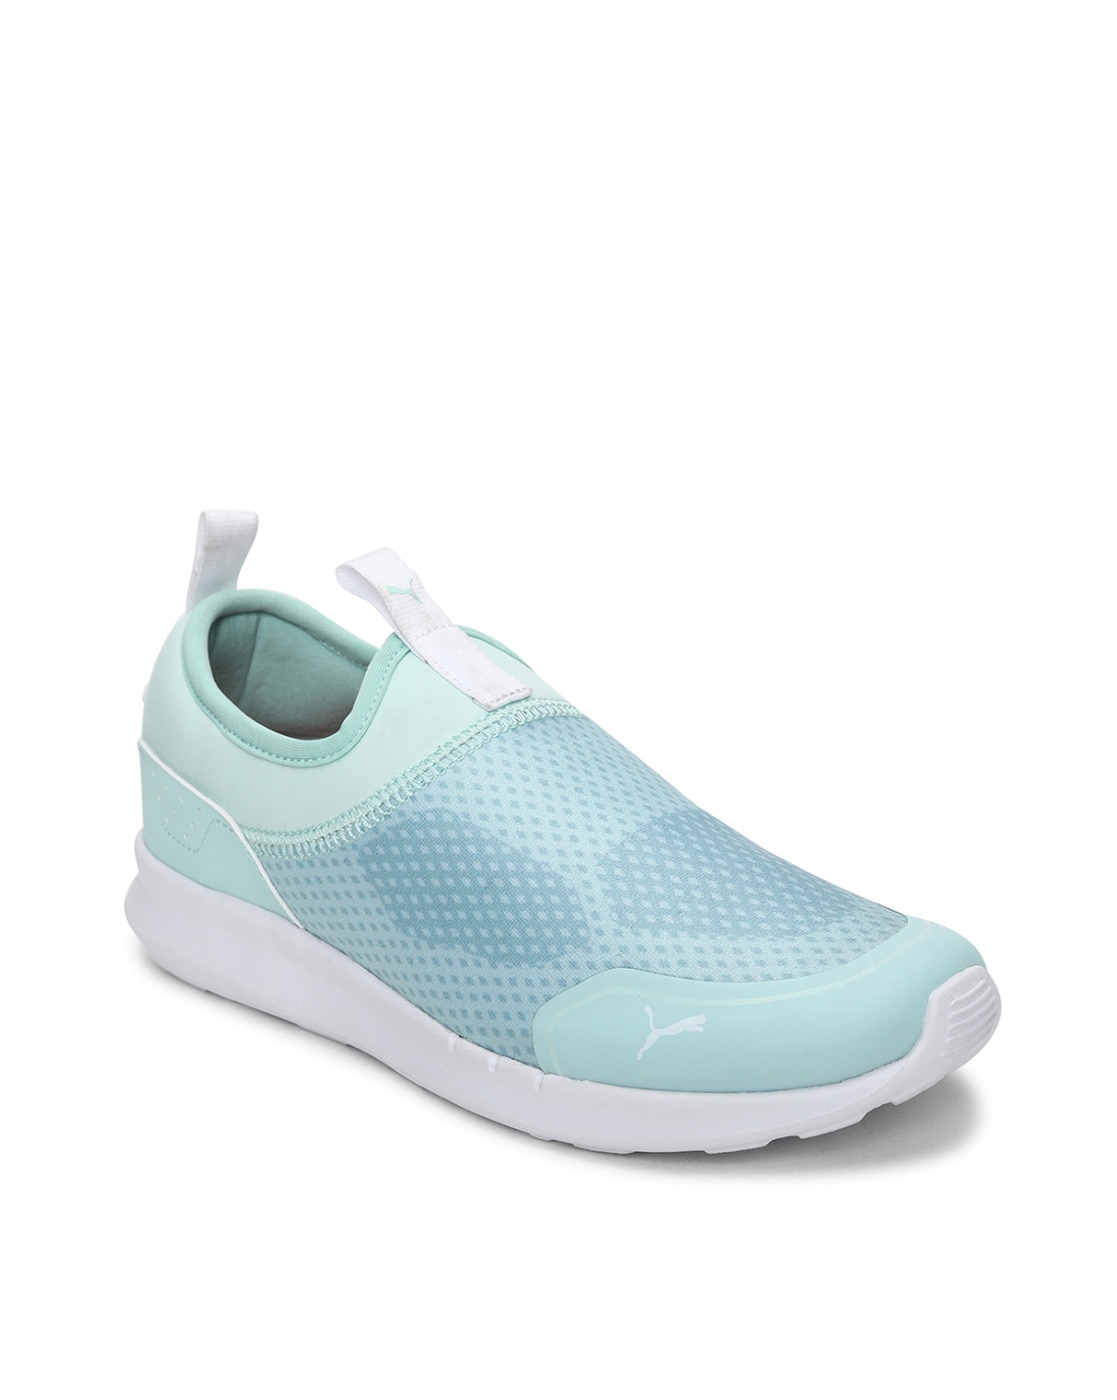 Discover more than 177 blue puma sneakers womens latest